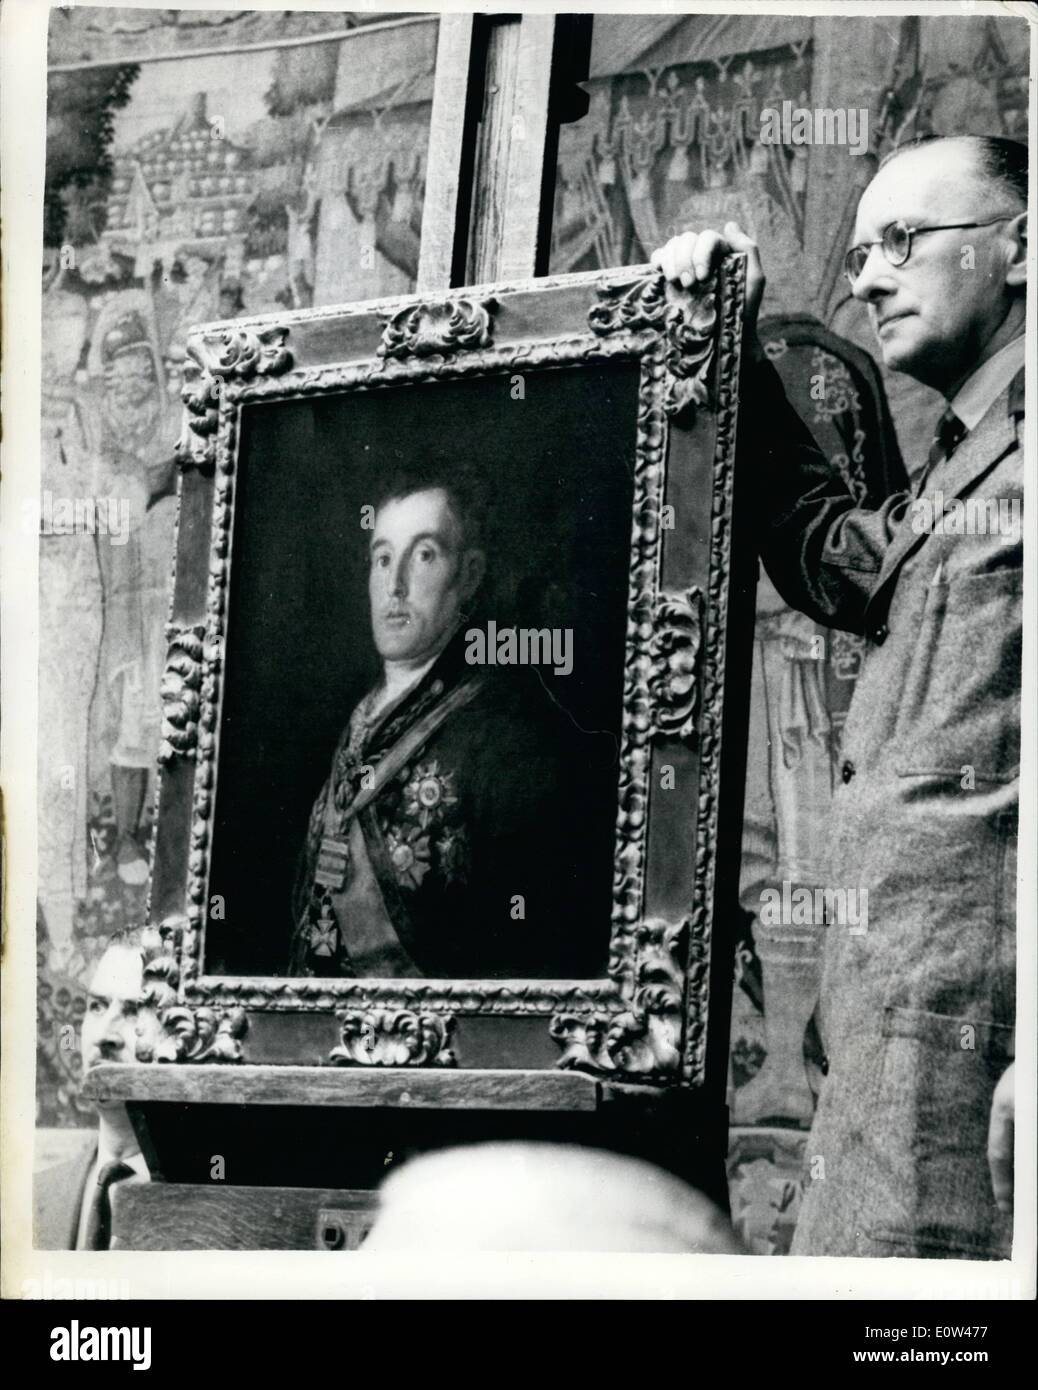 Jun. 06, 1961 - Sale of Old Master Paintings at Sothesby's. Goya Painting Fetches 40,000. Important Old Master paintings were on sale today at Sothesby's and included pictures sent for sale by the Duke of Leeds, Miss Elizabeth Taylor, Miss Sonja Henie, Sir Robert Adeane and Lady Elliot of Harwood. The famous painting by Goya of the 1st. Duke of Wellington, put up for sale by the Duke of Leeds was sold for 40,000. Keystone Photo Shows: The Goya painting of the the 1st. Duke of Wellington, which was sold for 40,000, pictured during today's sale at Sothesby's. Stock Photo